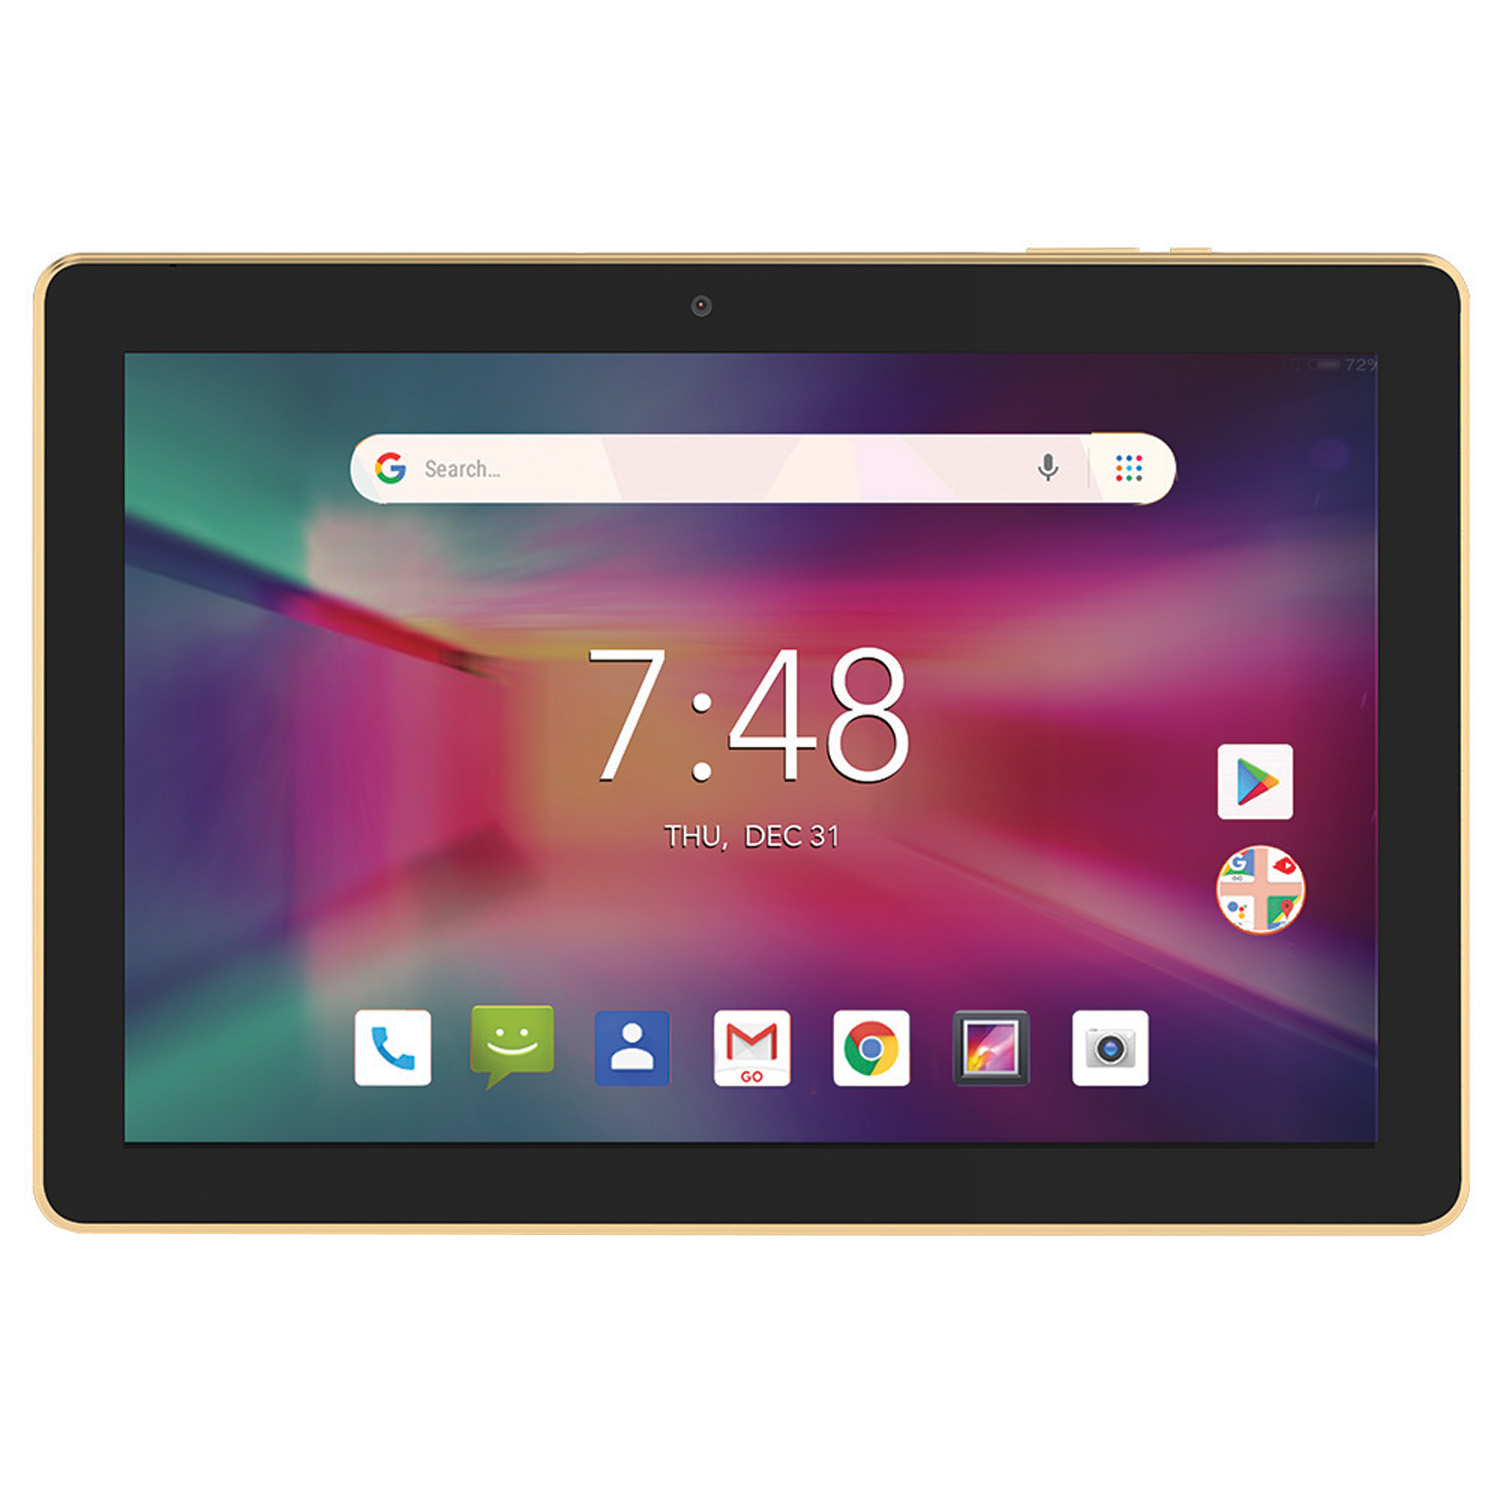 Hyundai Technology Koral 10X3 10” HD Tablet, Android 9.0 Pie, 2 GB RAM, 32 GB Storage, Dual Camera, Quad-Core Processor, Wi-Fi, Android 9.0, Gold - image 1 of 5